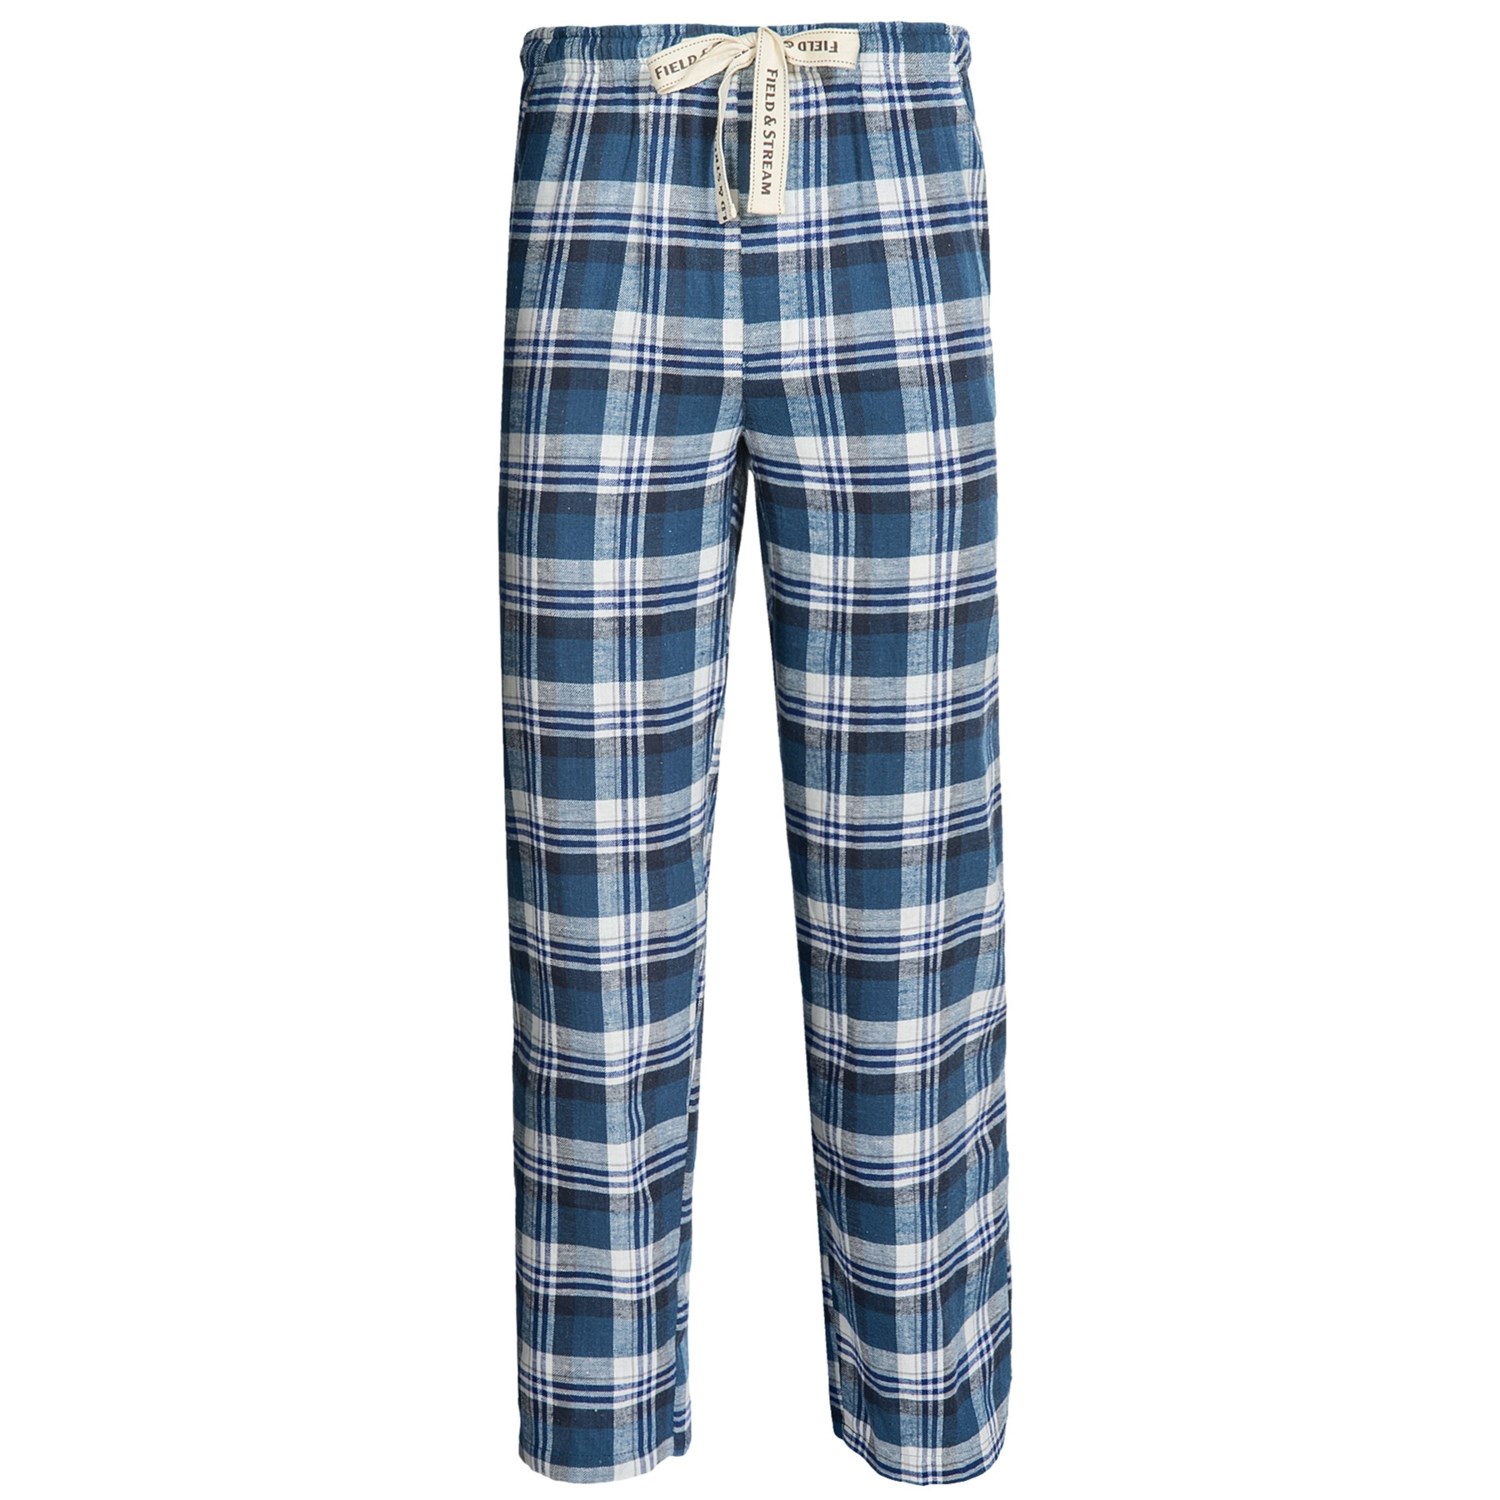 Field & Stream Flannel Pajama Pants (For Men) 8745X - Save 50%